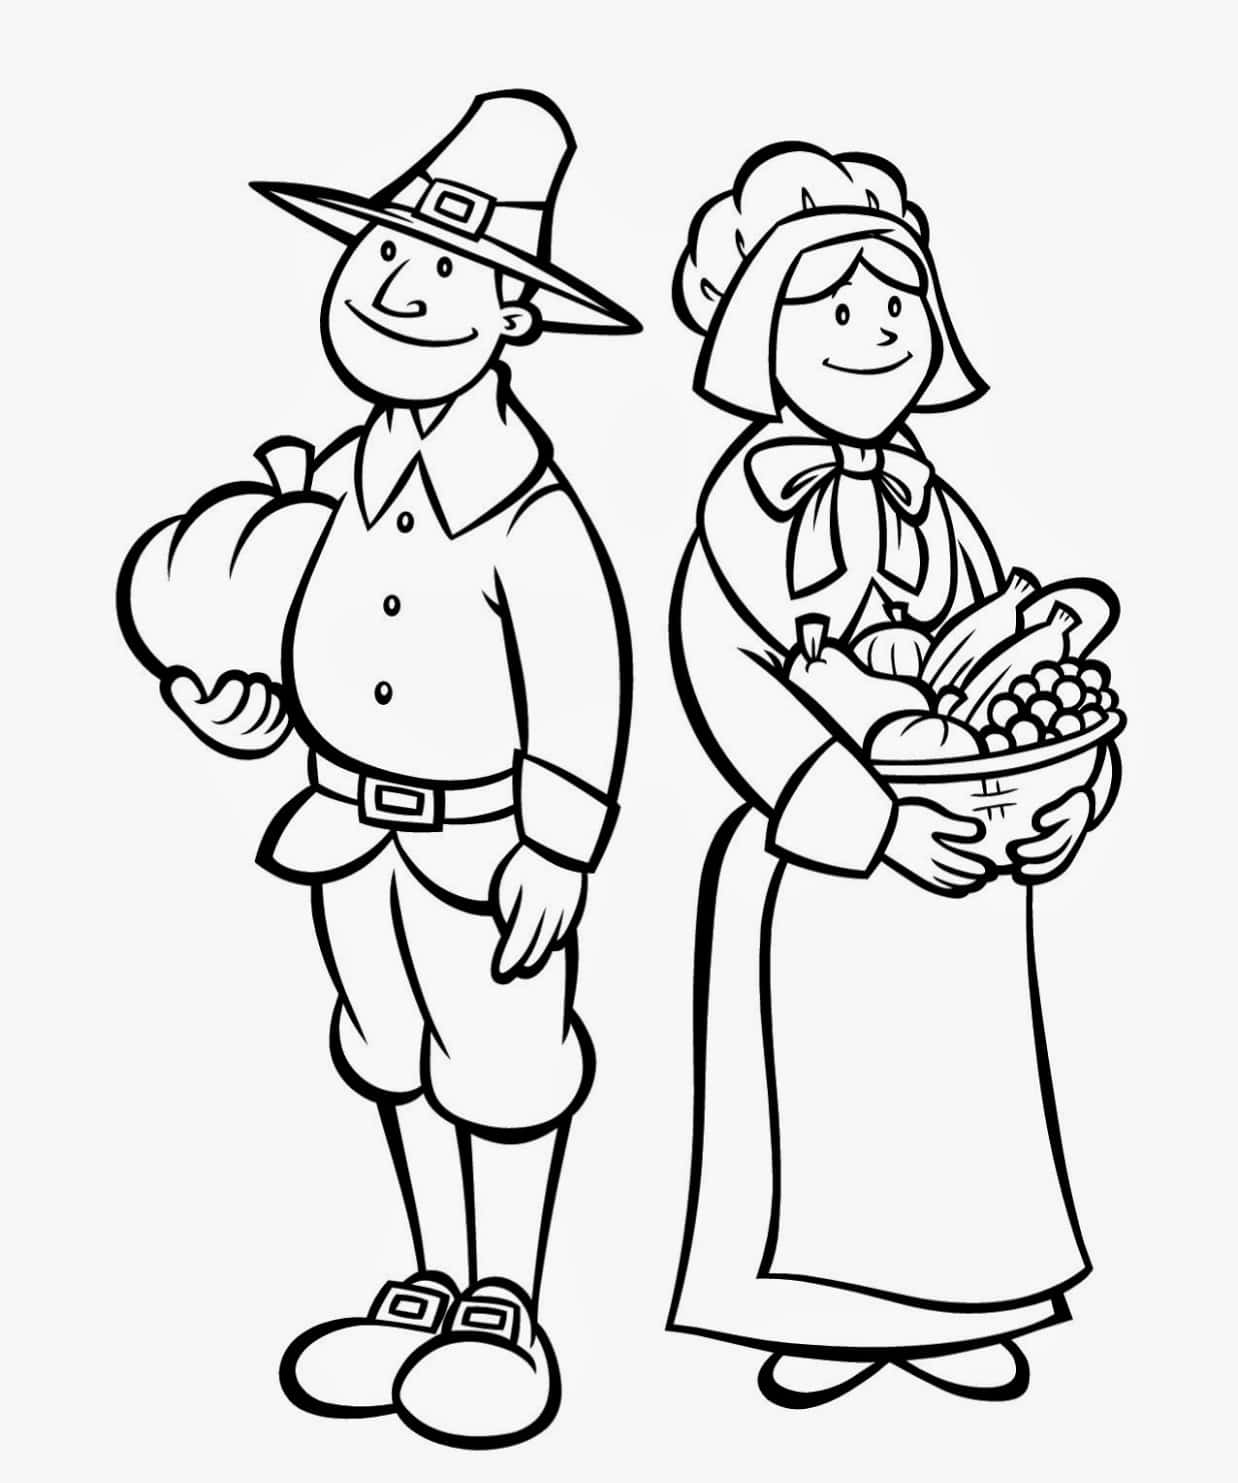 Download a couple of pilgrims in traditional clothing